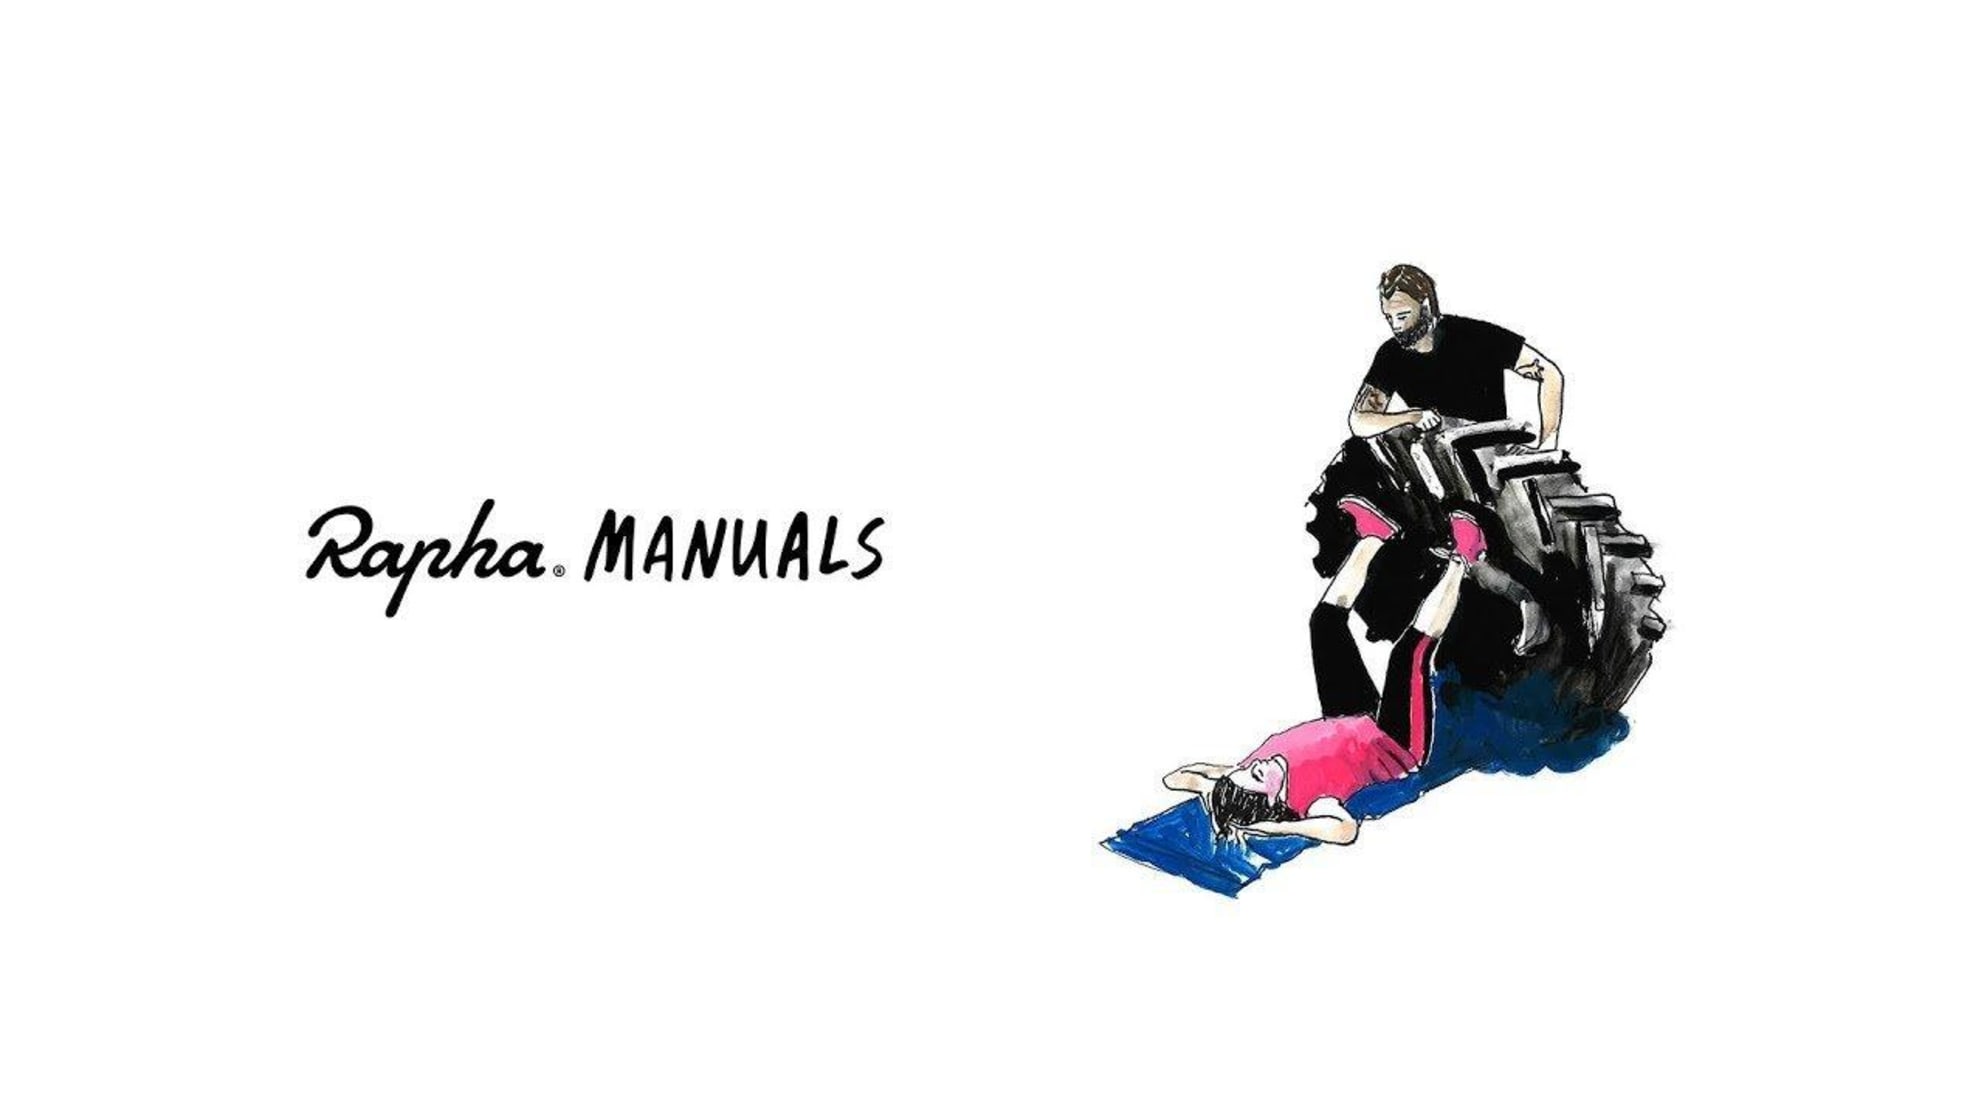 Rapha Manuals: The Sport With Surprises